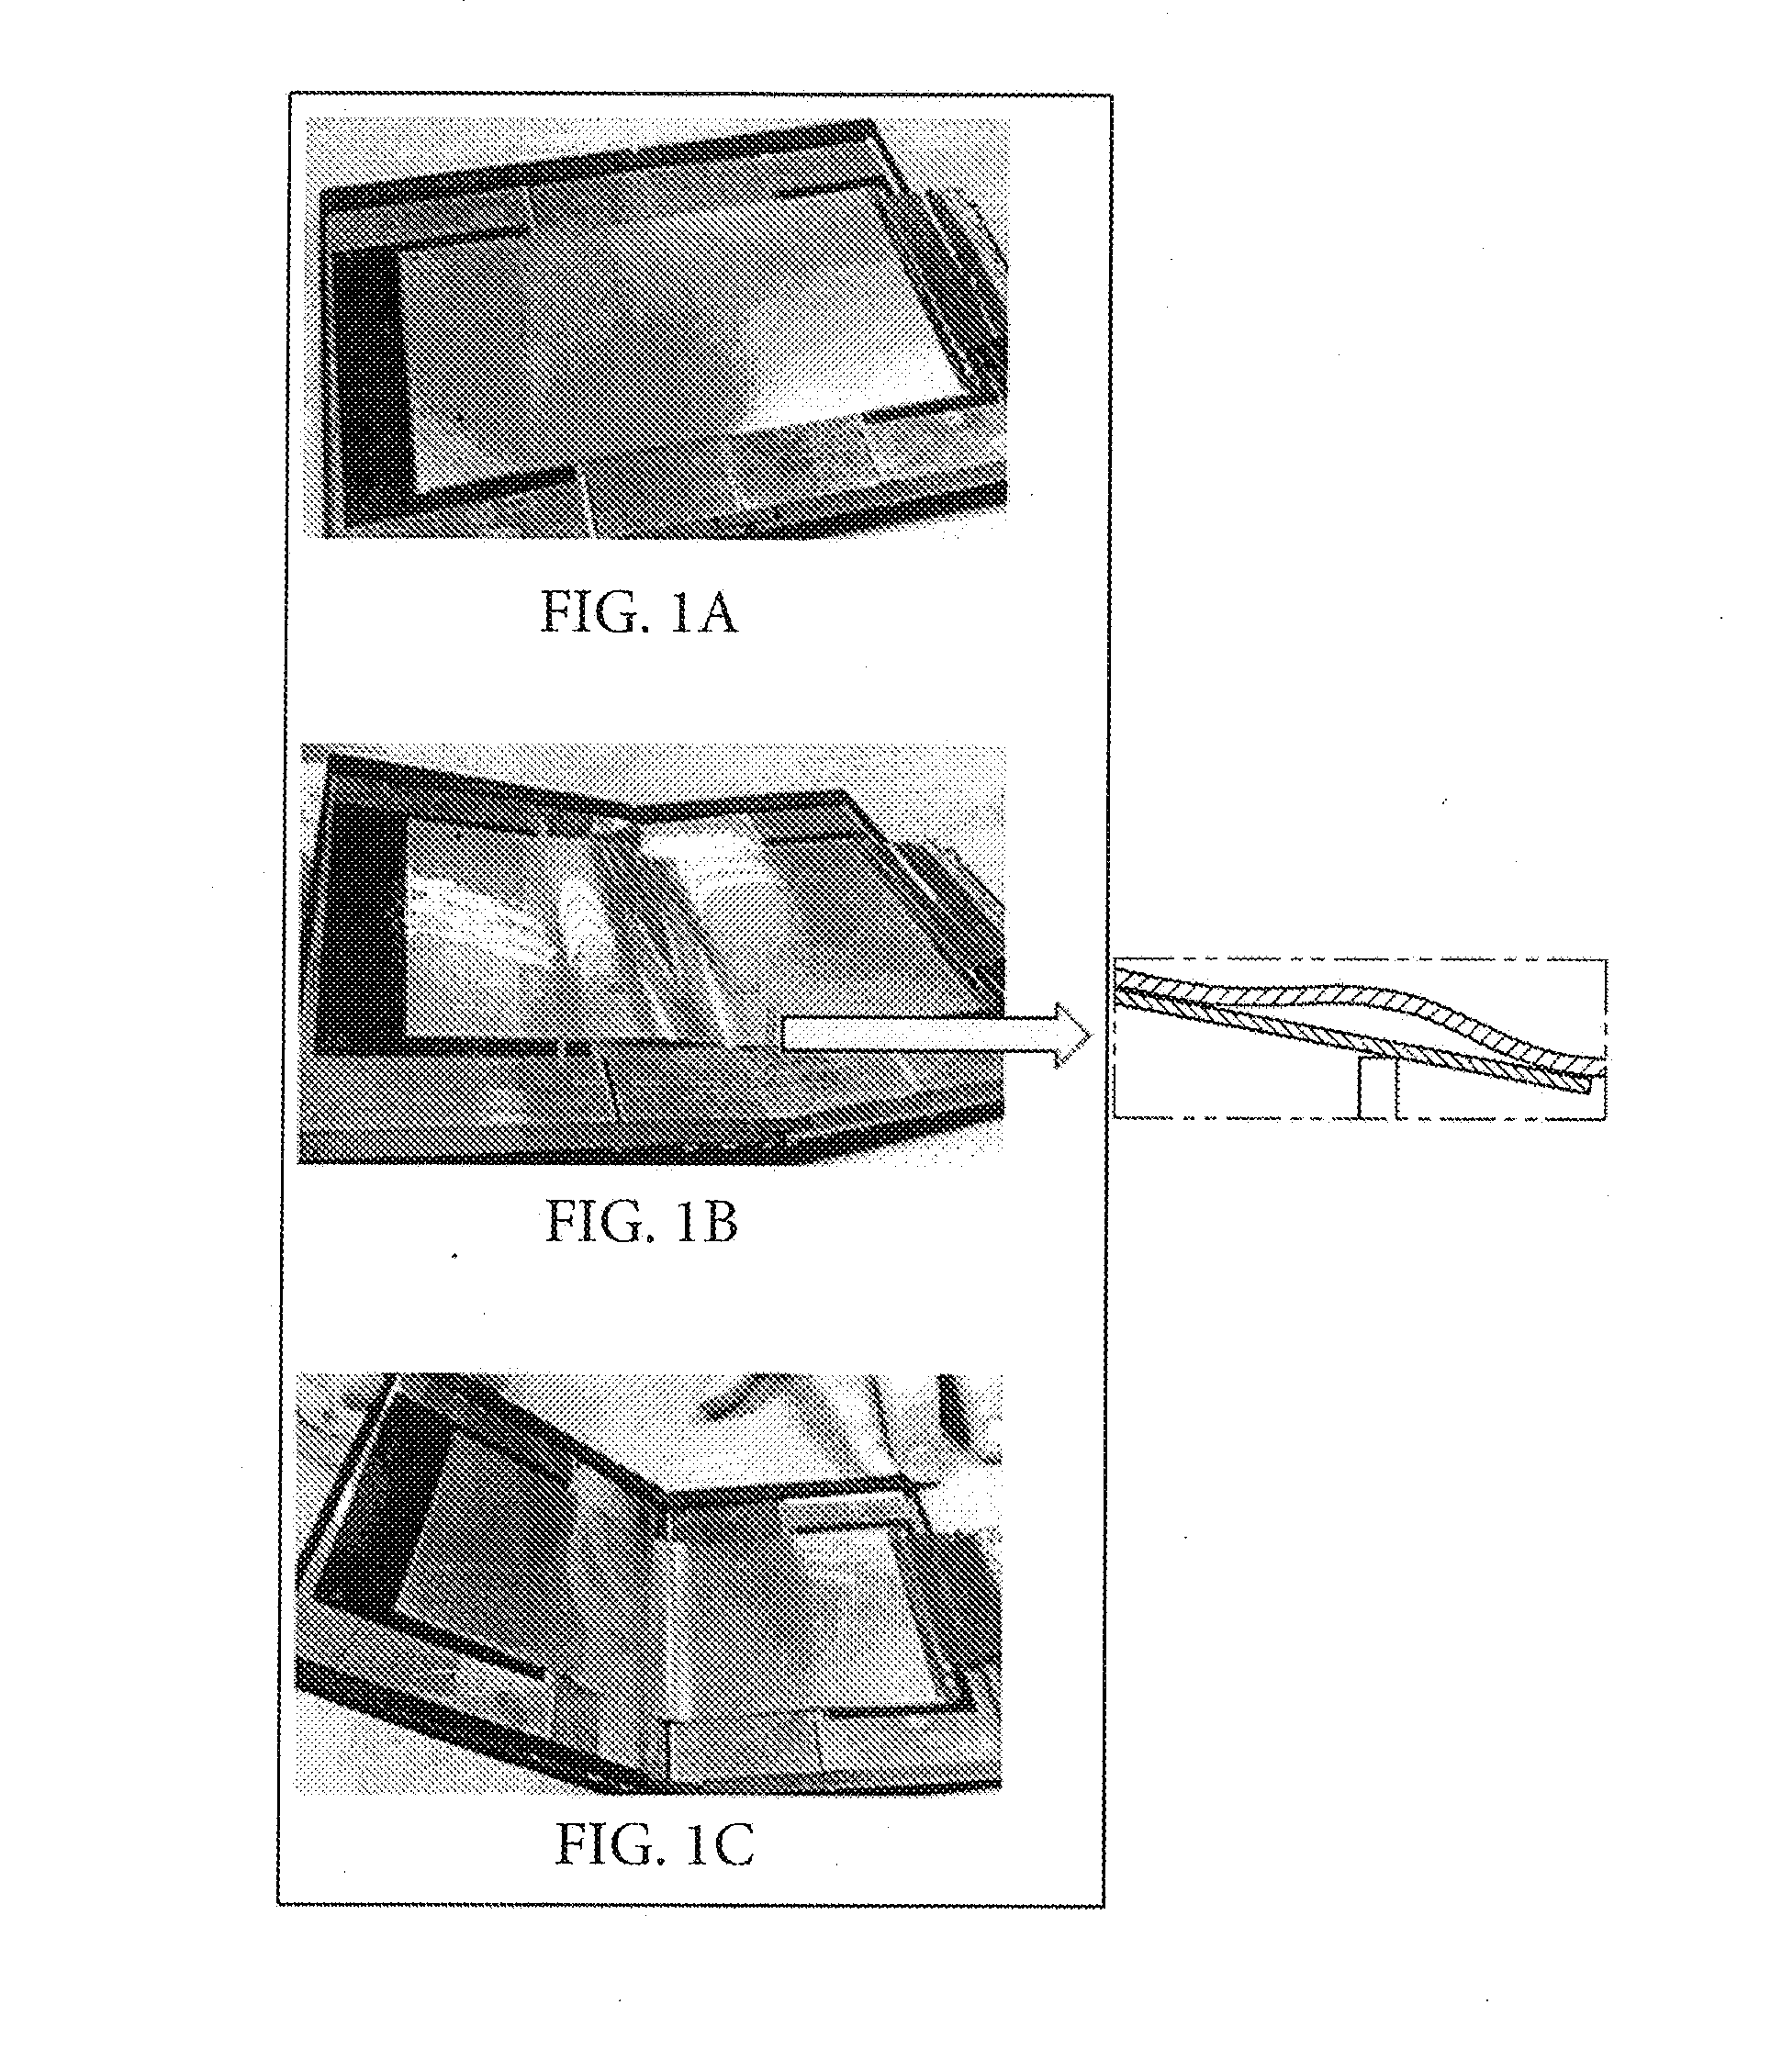 Apparatus for supporting display panel